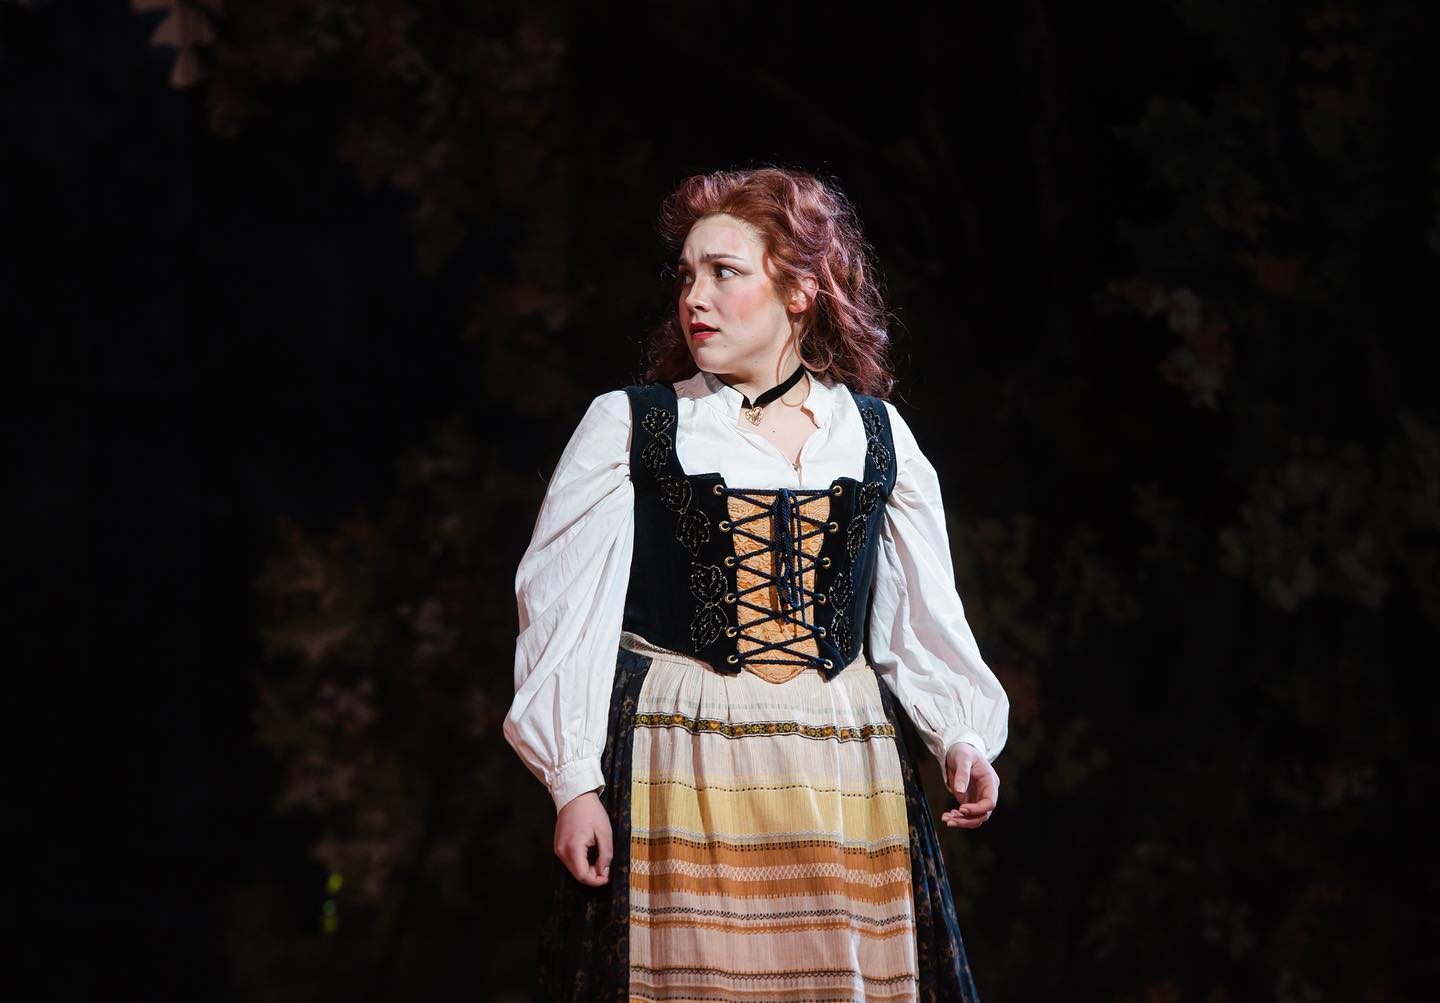 IN REVIEW: soprano MARGARET ANN ZENTNER in the title rôle of A.J. Fletcher Opera Institute's February 2022 production of Gaetano Donizetti's LINDA DI CHAMOUNIX [Photograph © by André Peele; used with permission]